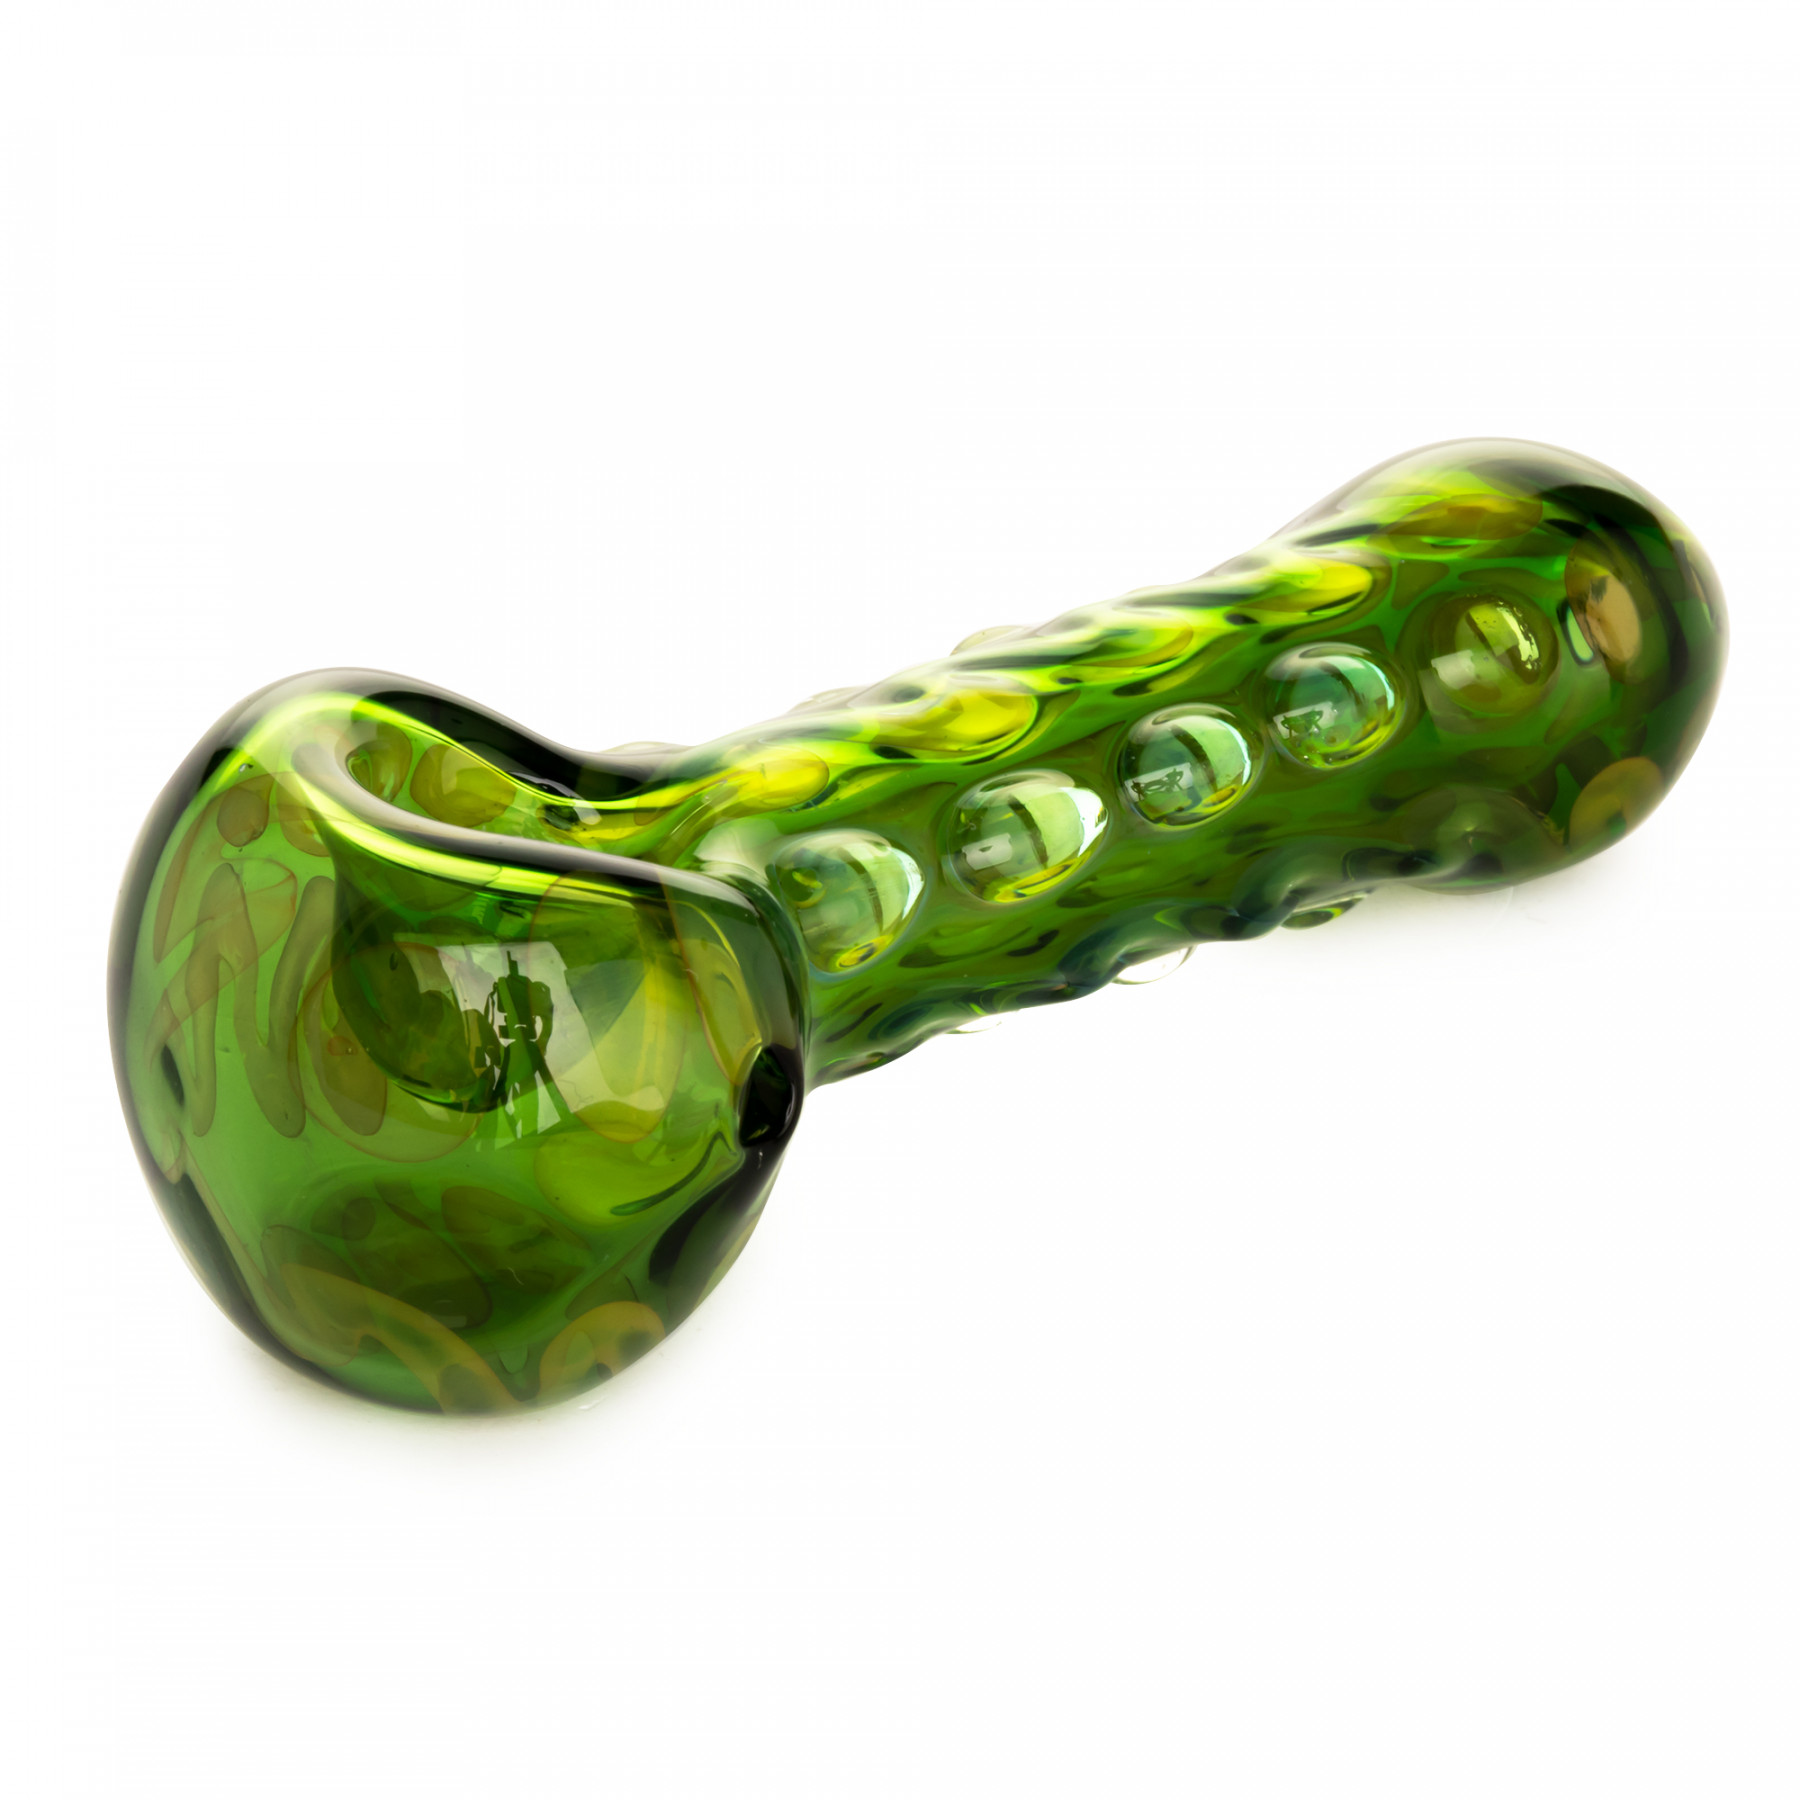 4.5" E's Special Spoon Hand Pipe